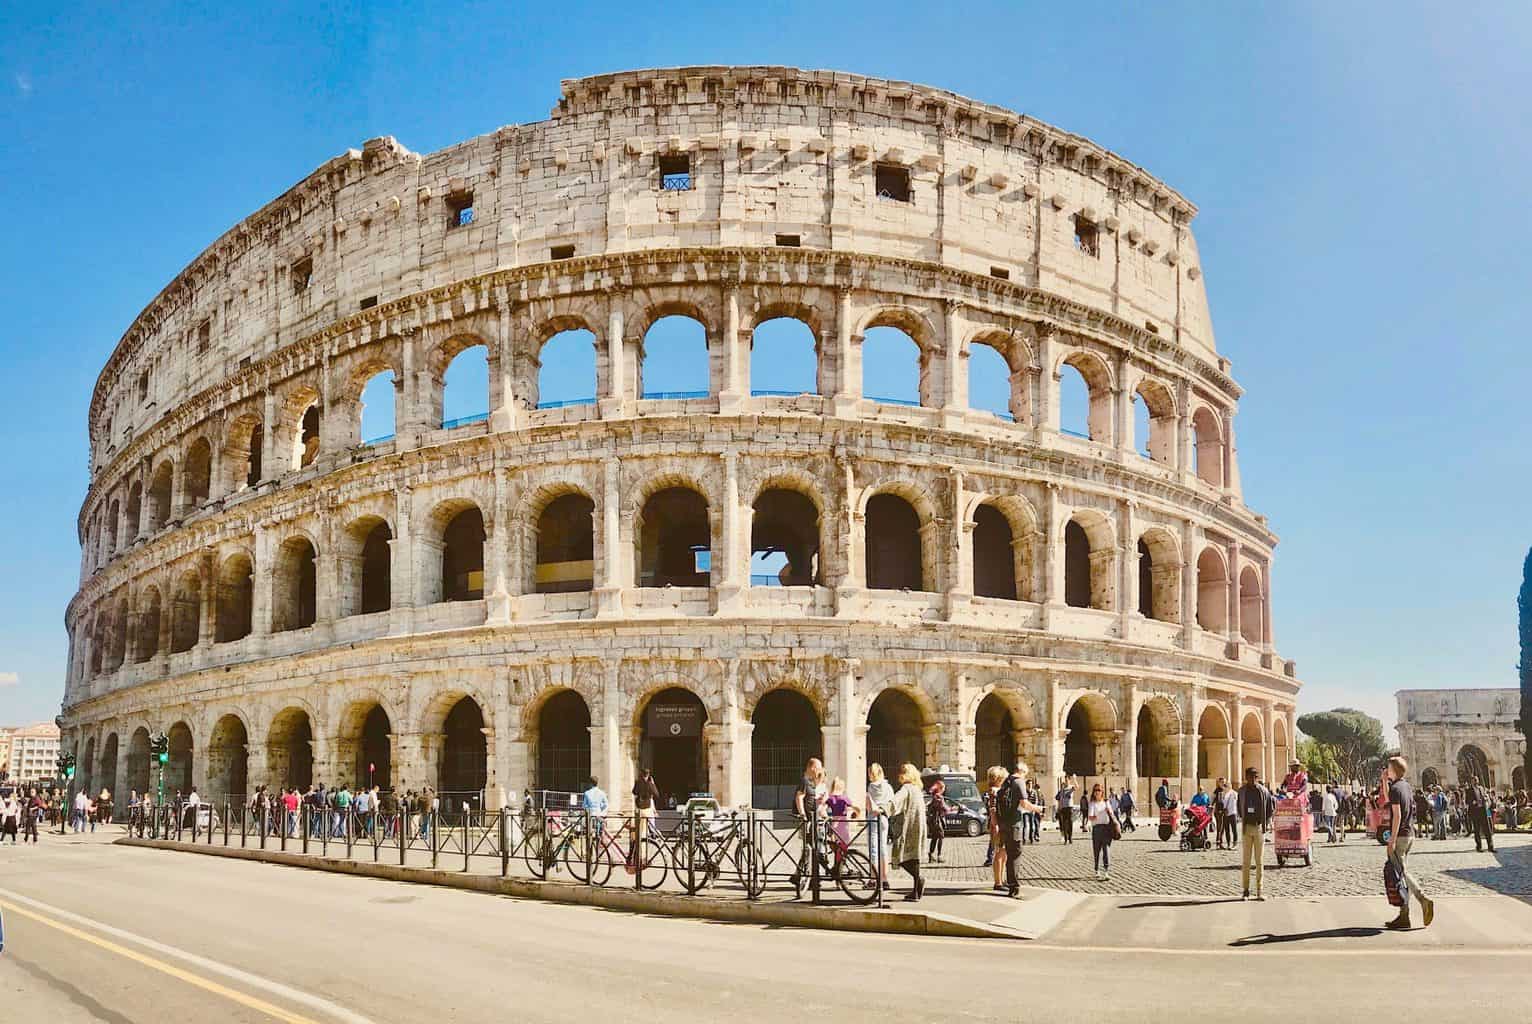 If you only see one thing in Rome, then the Colosseum should be it.